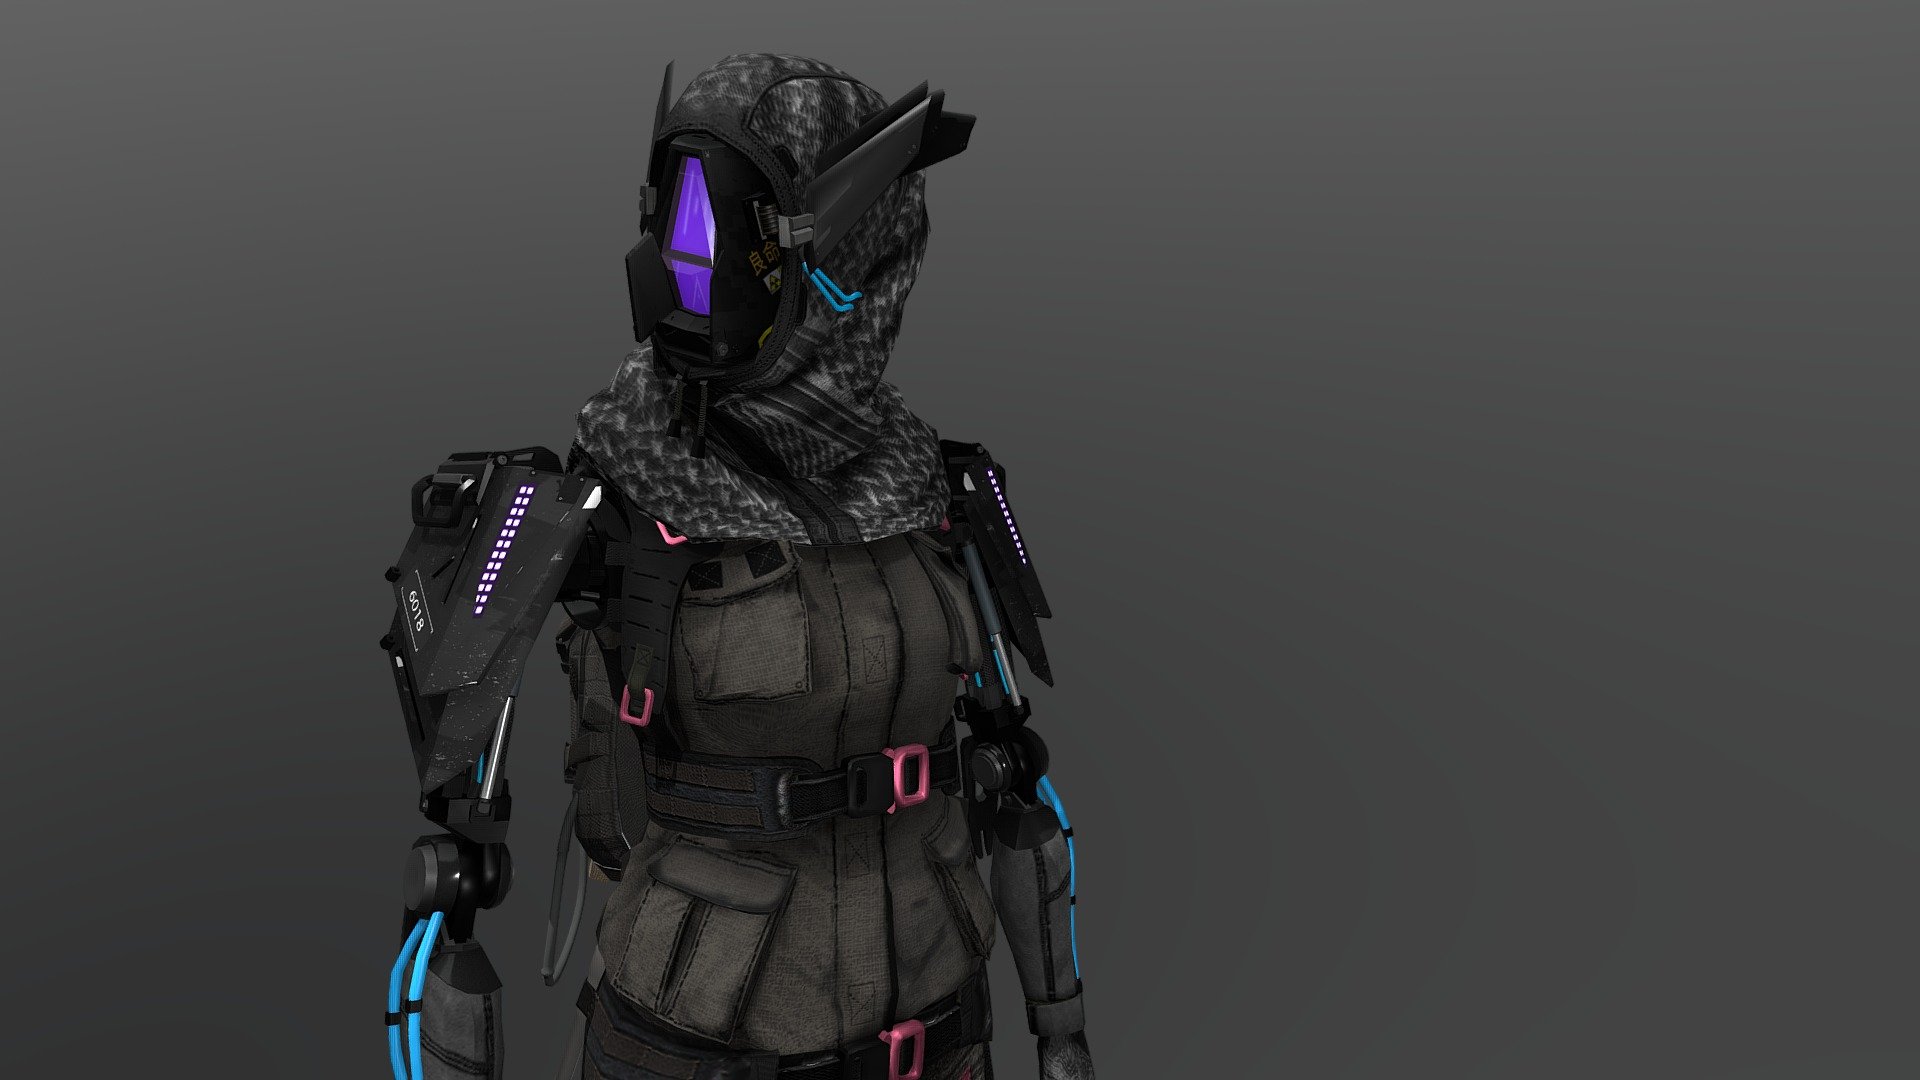 Character project inspired by Titanfall 3d model